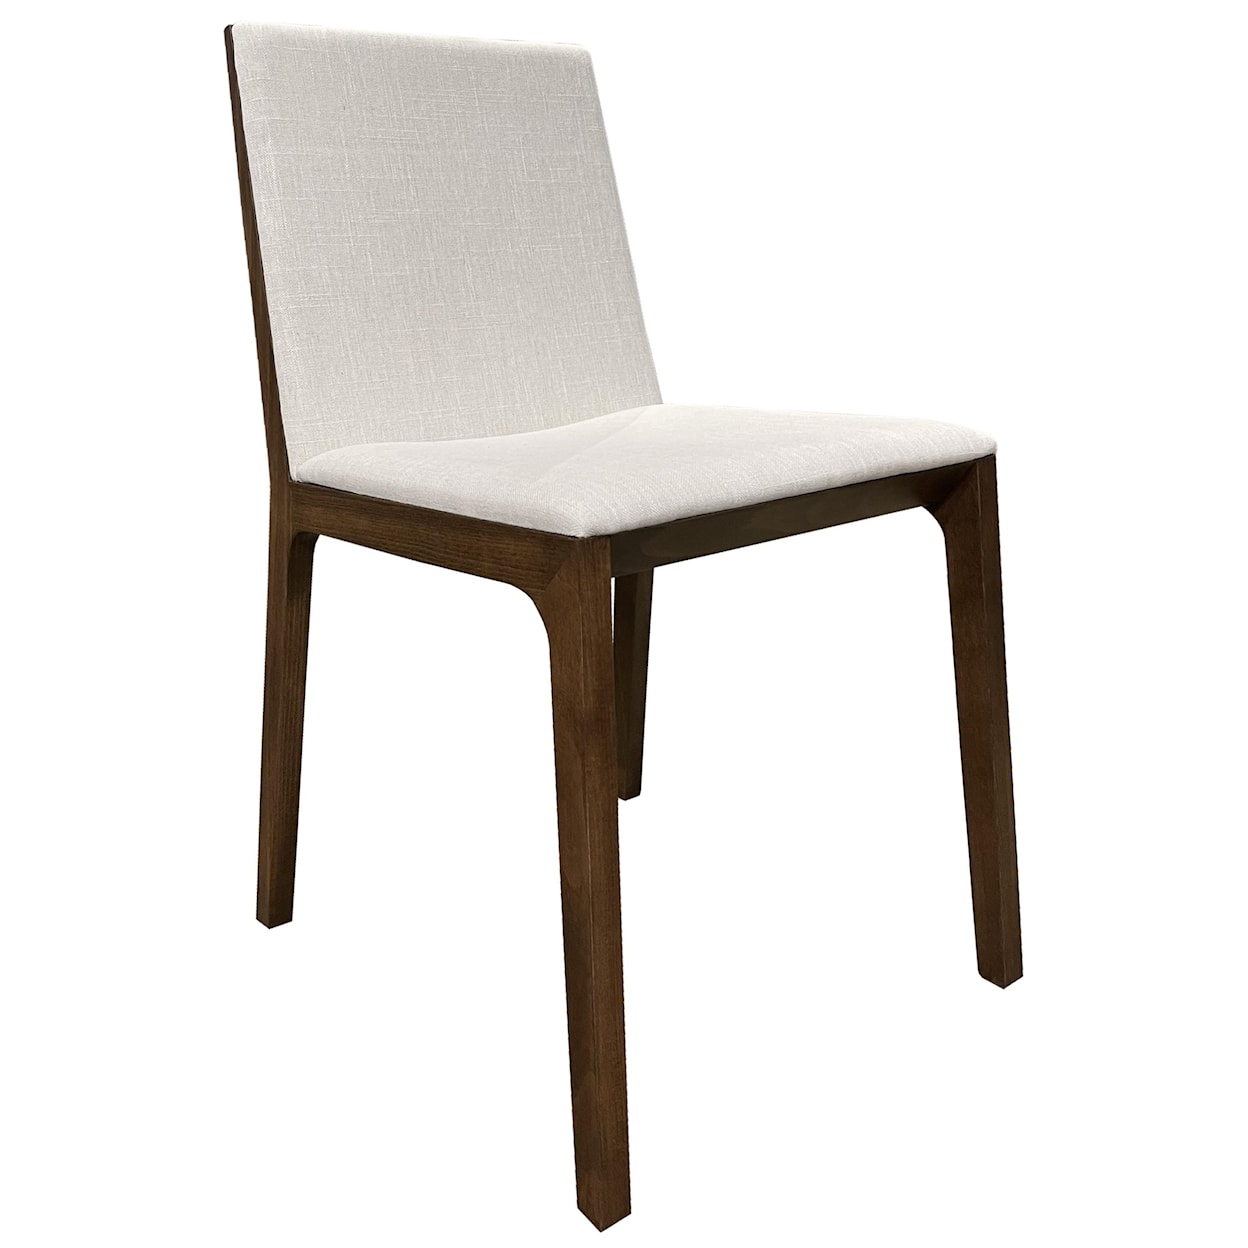 Huppe Magnolia Dining Side Chair